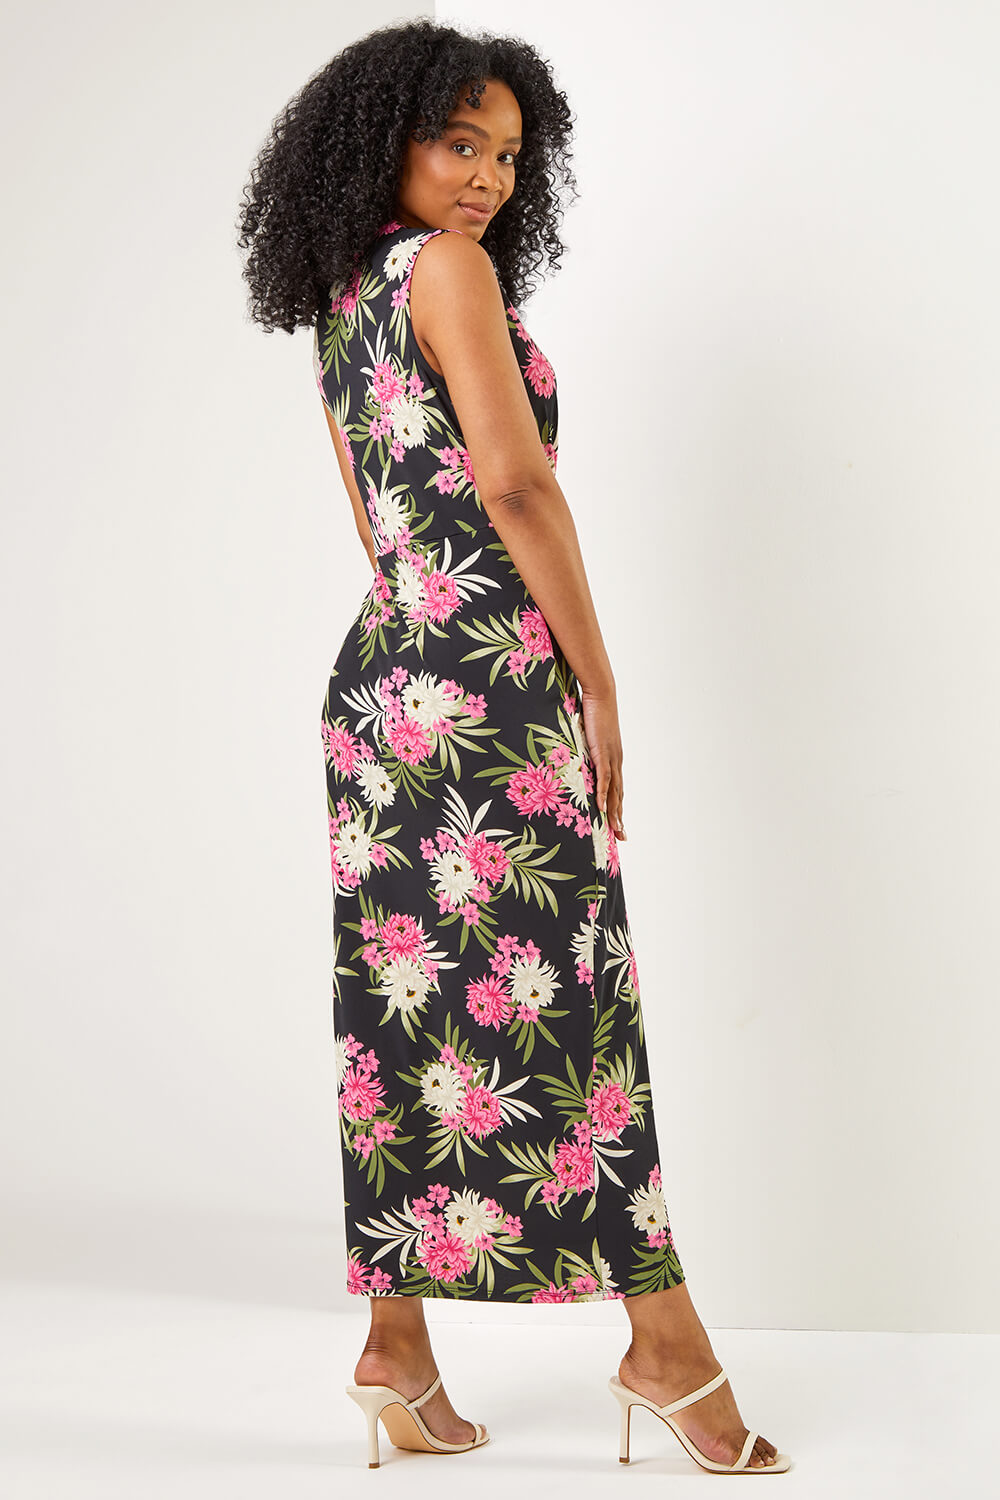 PINK Petite Floral Print Wrap Ruched Maxi Dress, Image 3 of 5